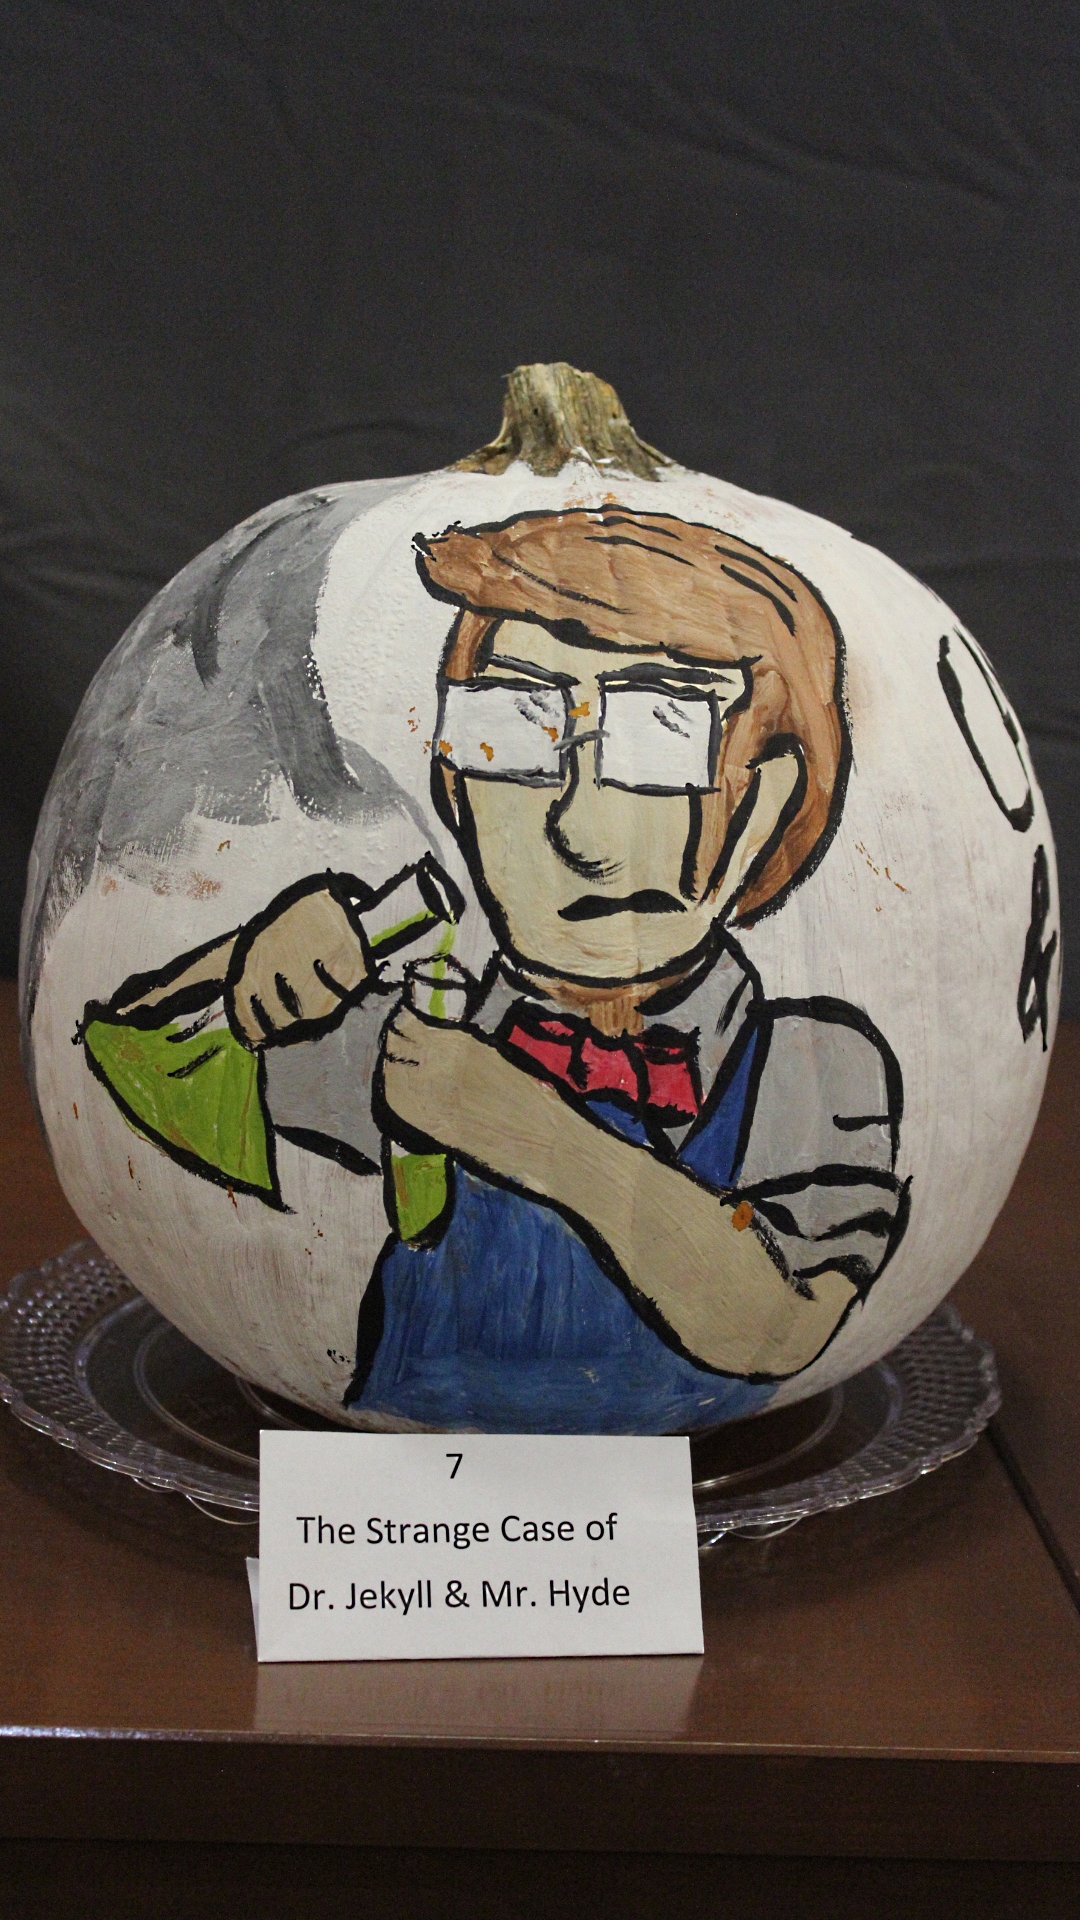 Pumpkin decorated as Dr. Jekyll